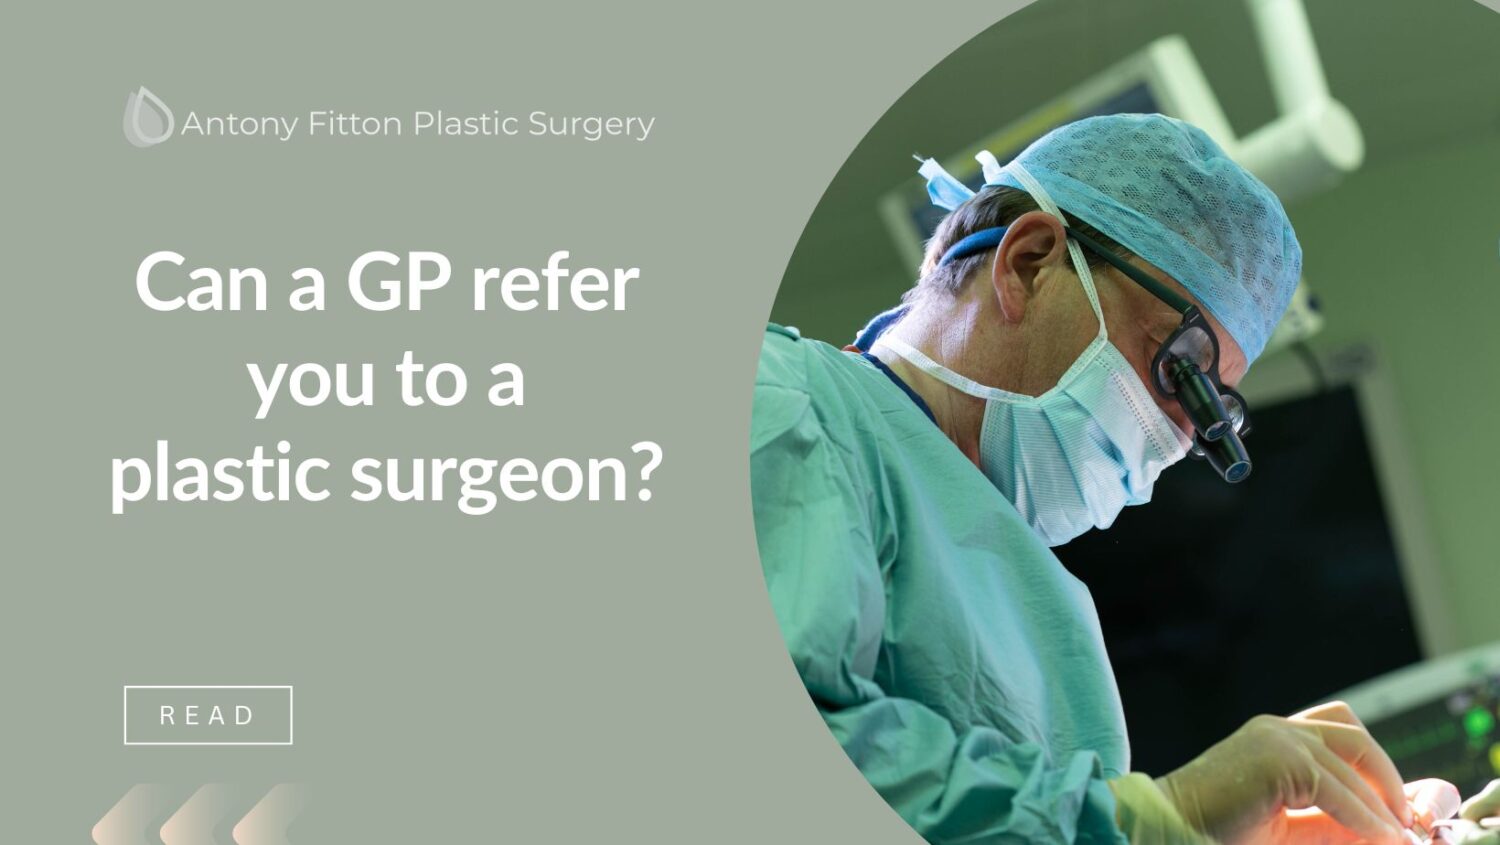 Can a GP refer you to a plastic surgeon?